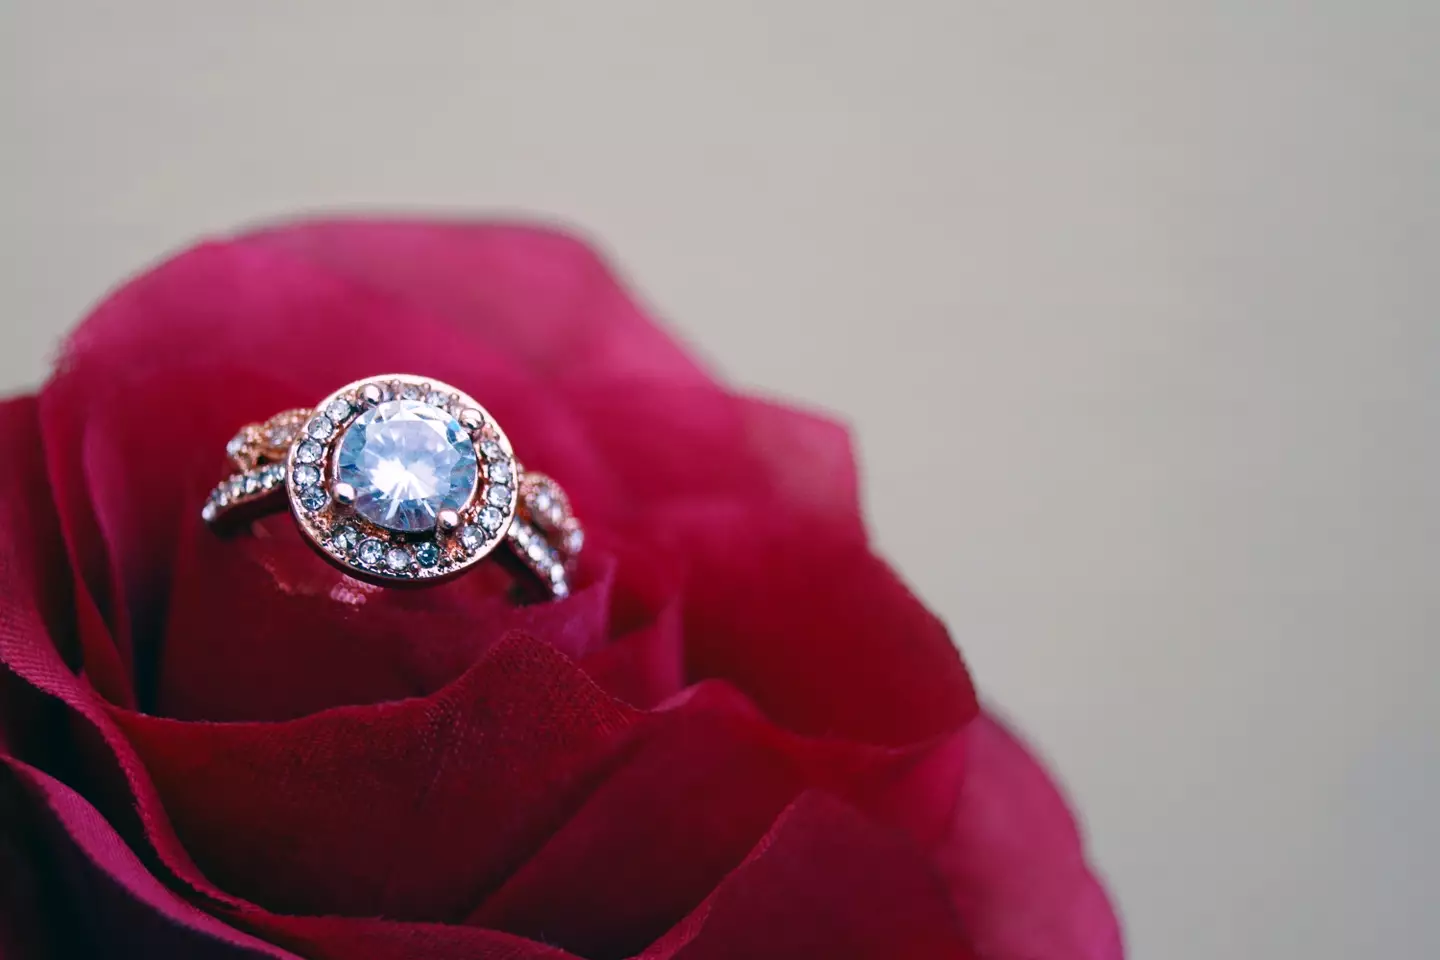 A stepmum has refused to give her stepson her heirloom engagement ring.